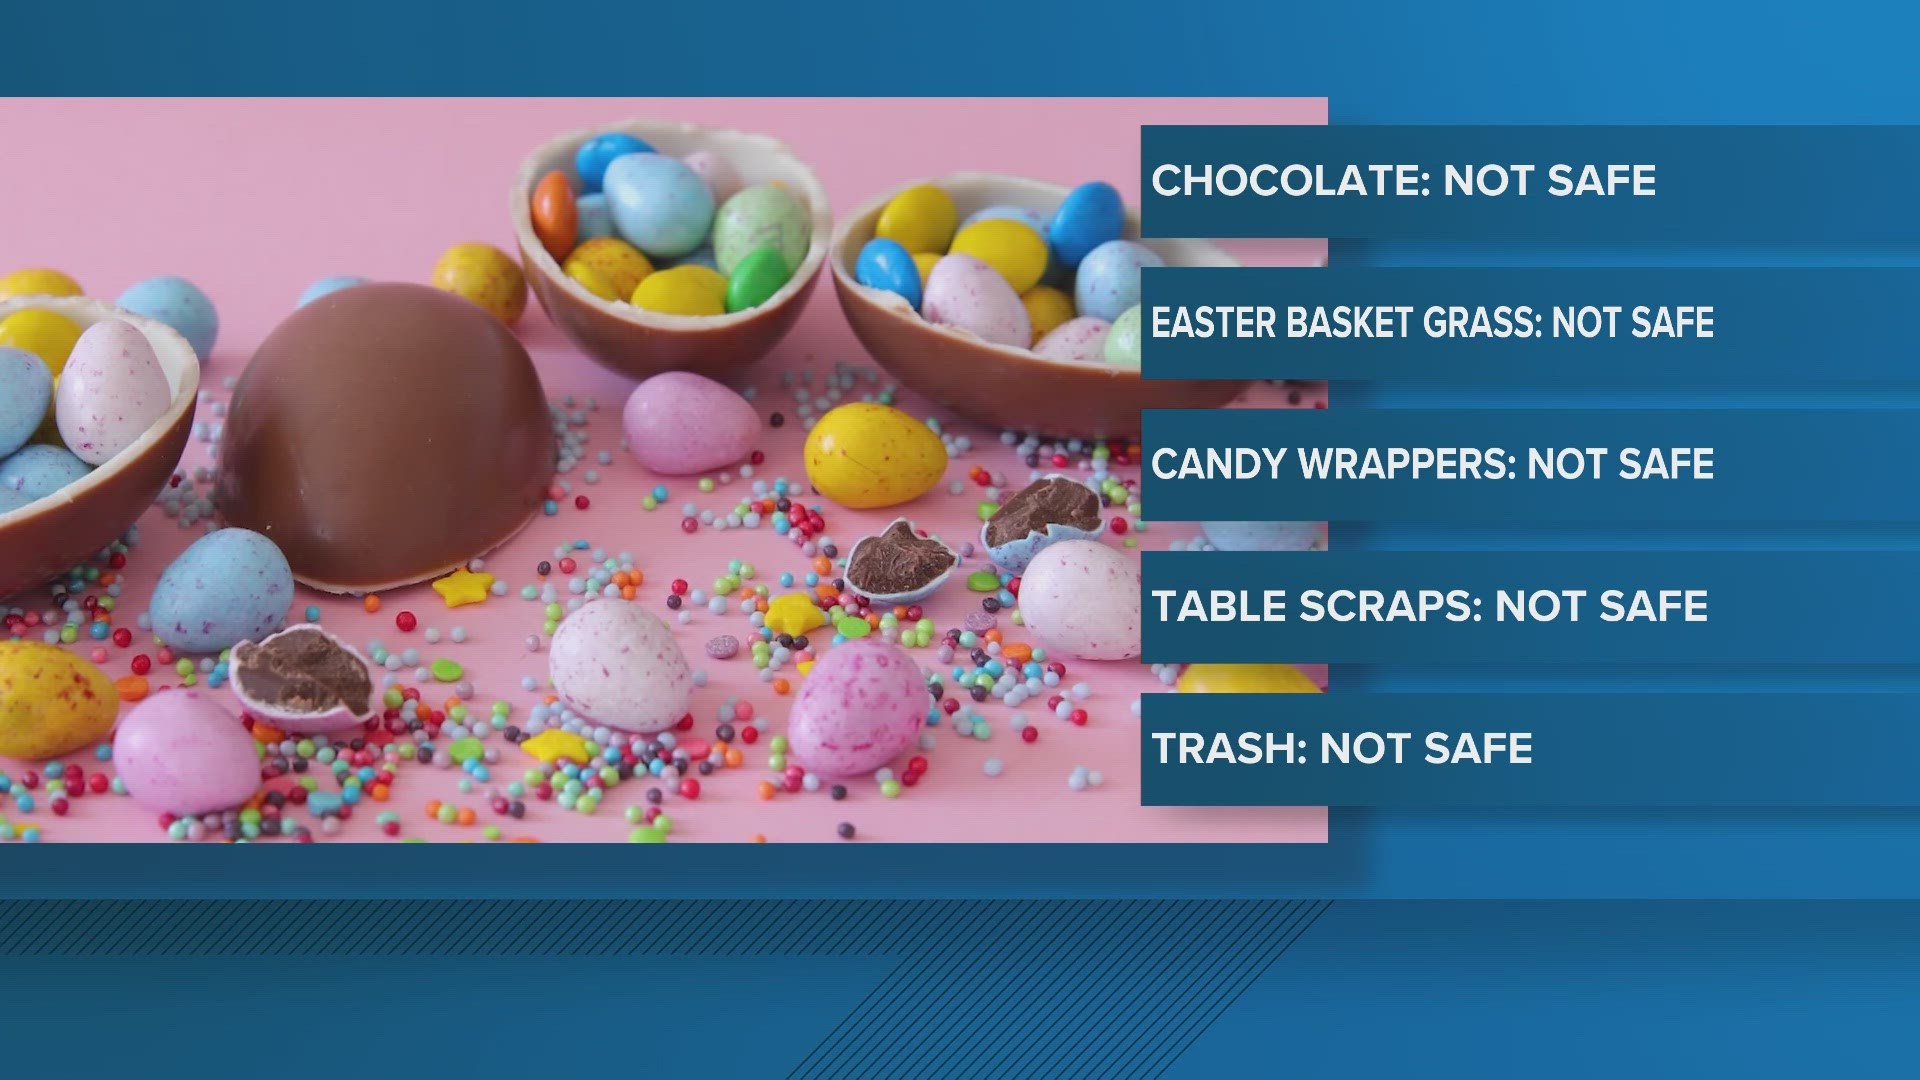 Here are some tips to keep your pets safe this Easter holiday season.